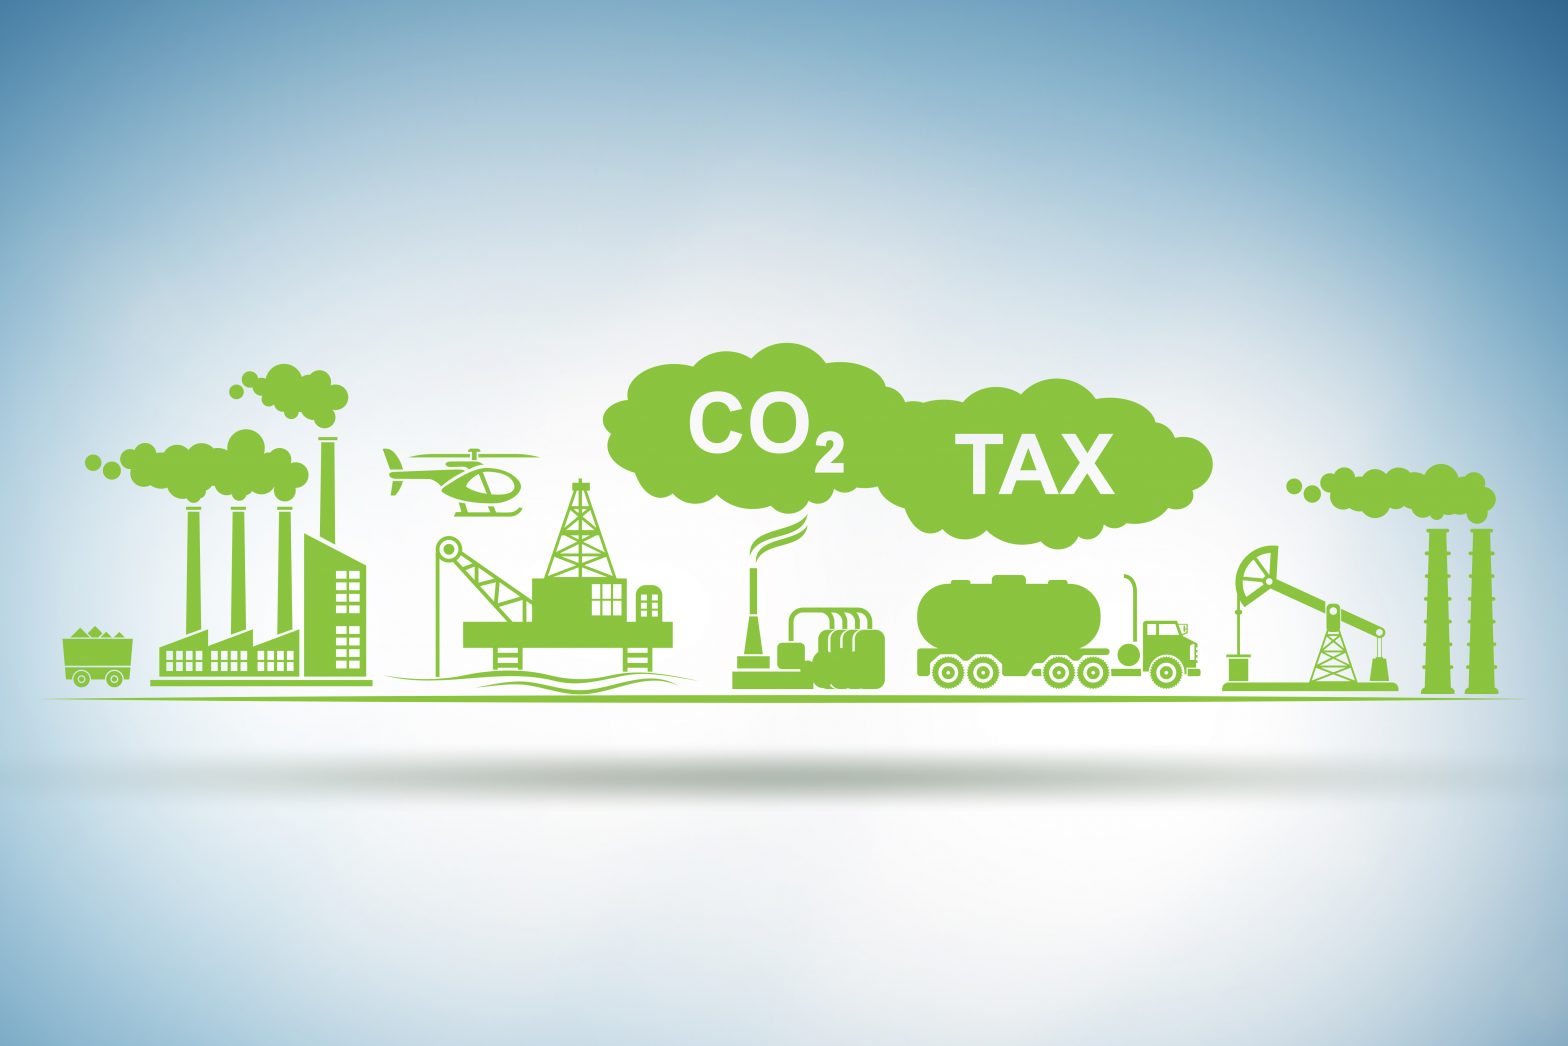 Industrial Co2 Tax graphic